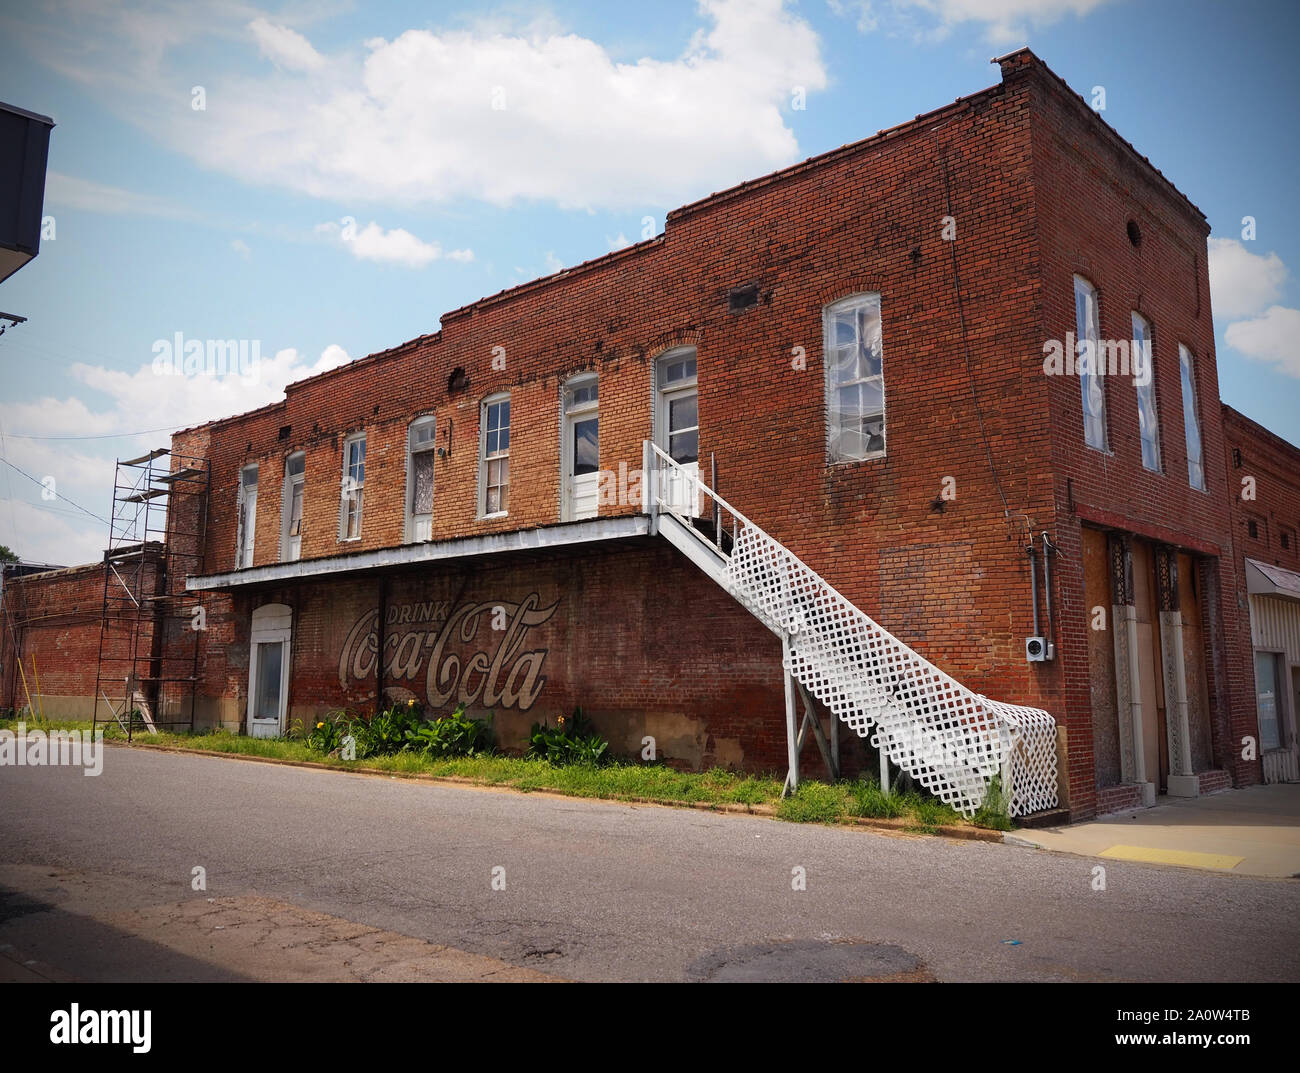 SARDIS, MISSISSIPPI - JULY 24, 2019: A vintage classic Coca Cola logo advertisement remains on the side of an brick building in the deep south, USA. Stock Photo